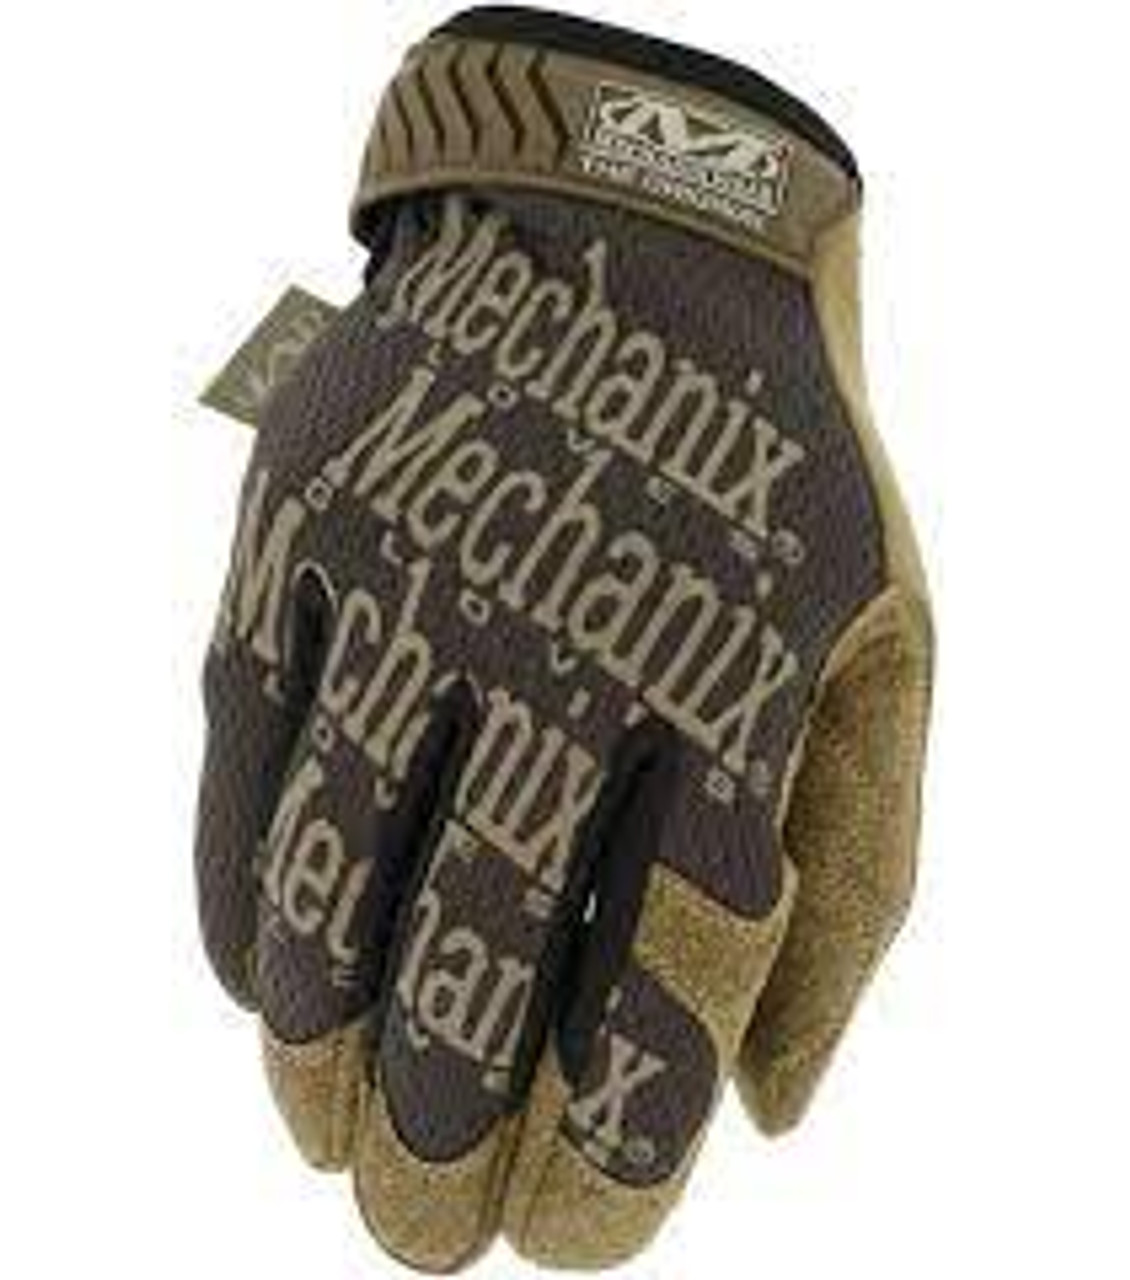 Gants travail OriginalMD Synthétique Taille 9 MG-07-009